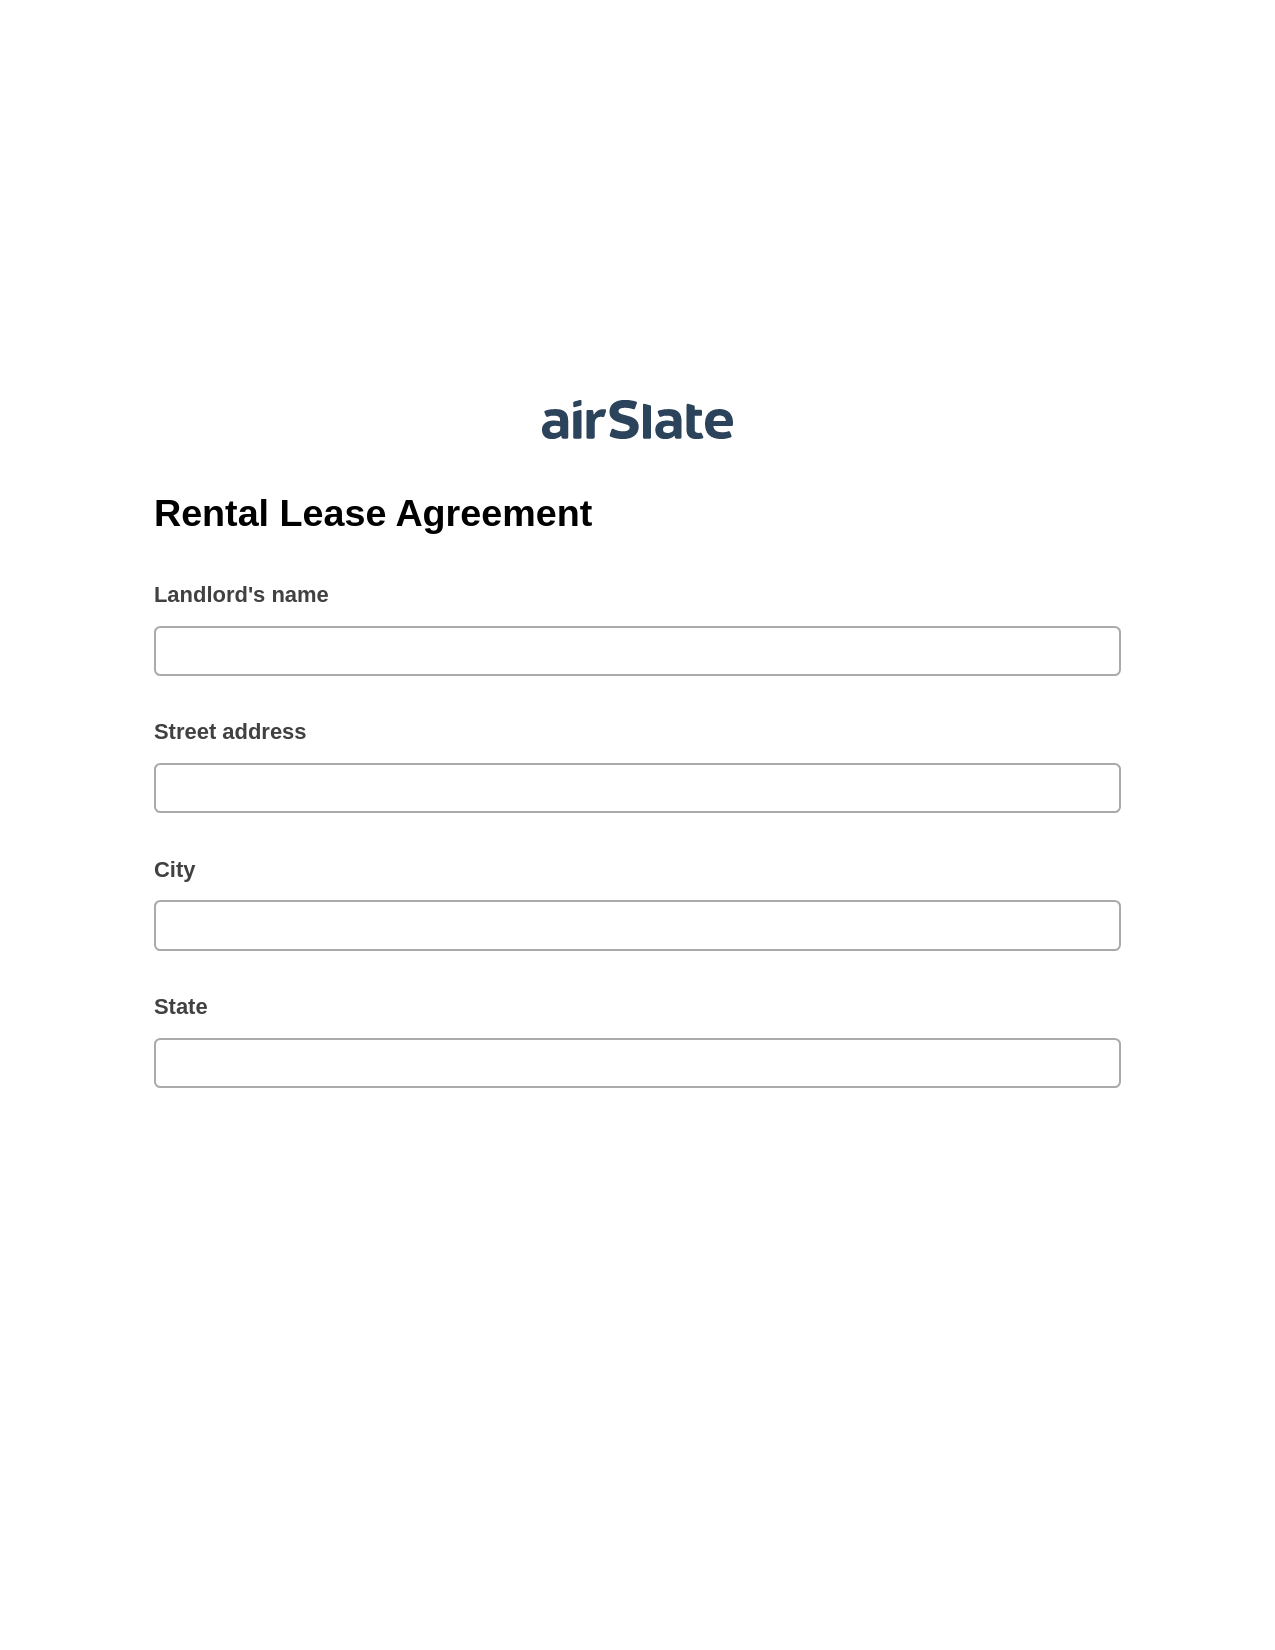 Rental Lease Agreement Pre-fill from MySQL Dropdown Options Bot, Jira Bot, Archive to SharePoint Folder Bot